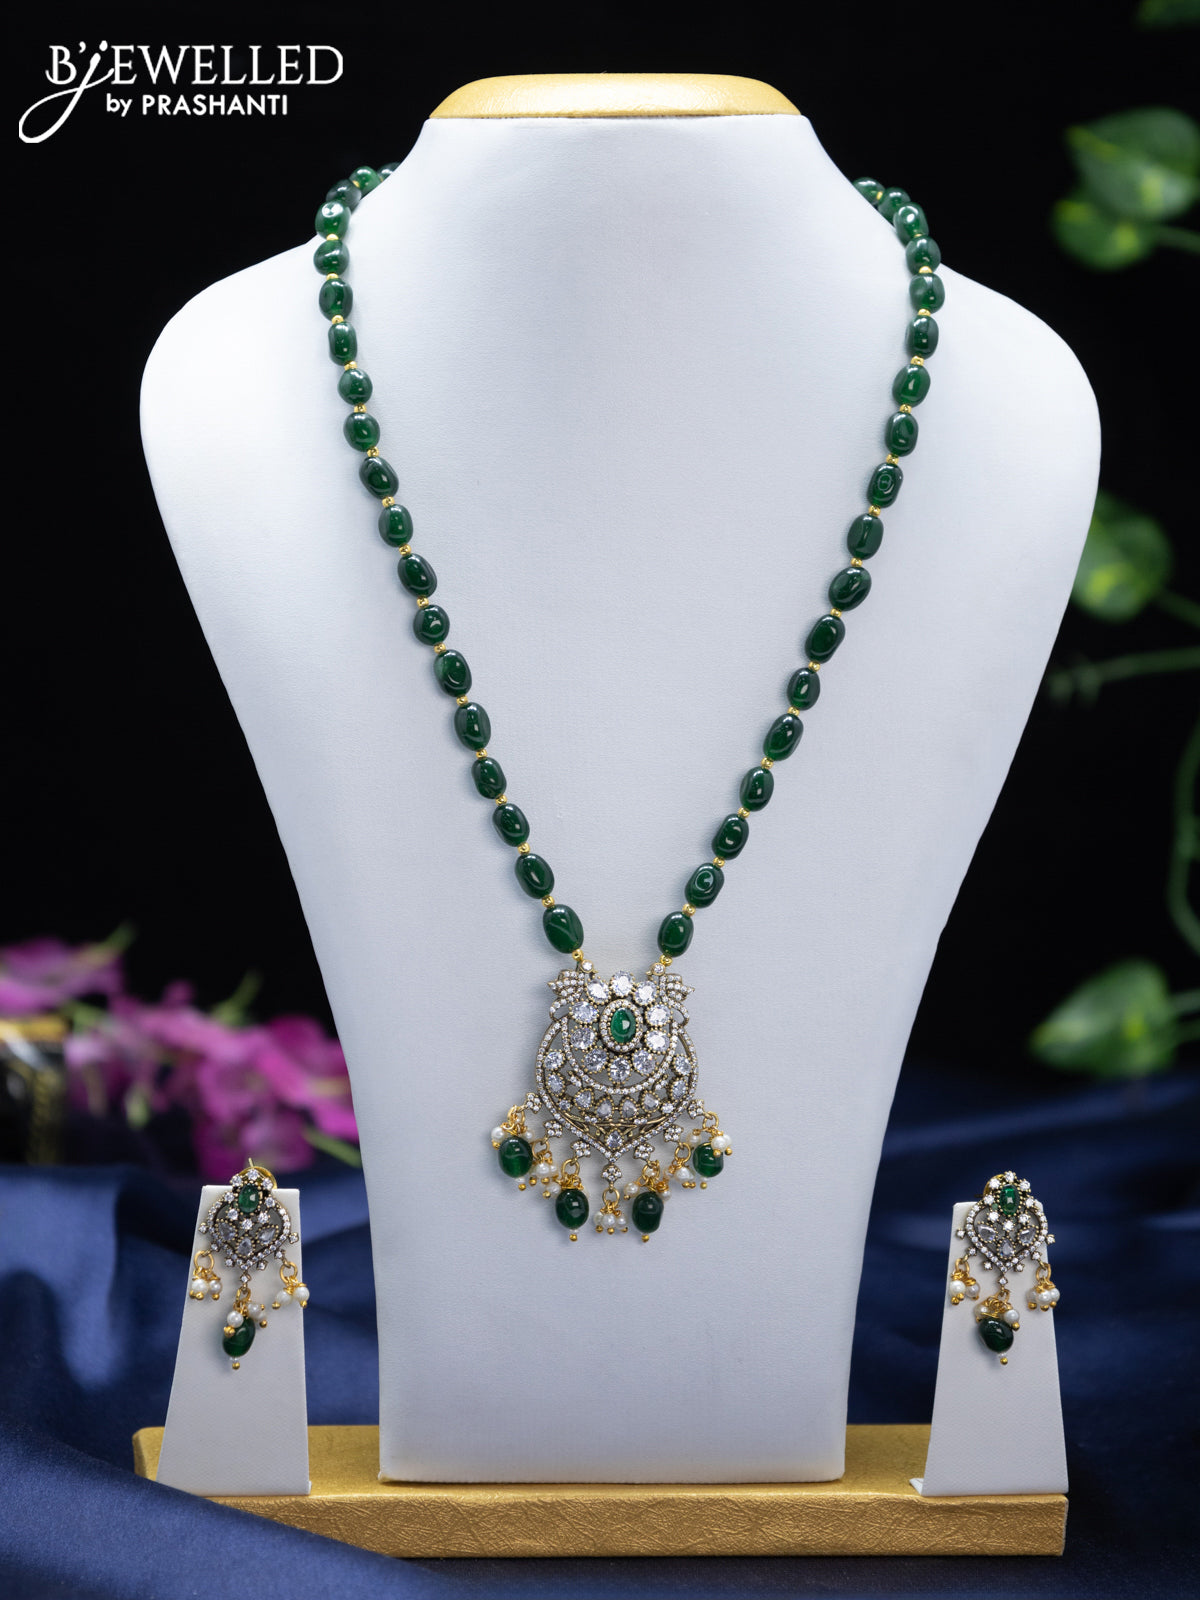 Beaded green necklace with emerald & cz stones and pearl & beads hangings in victorian finish